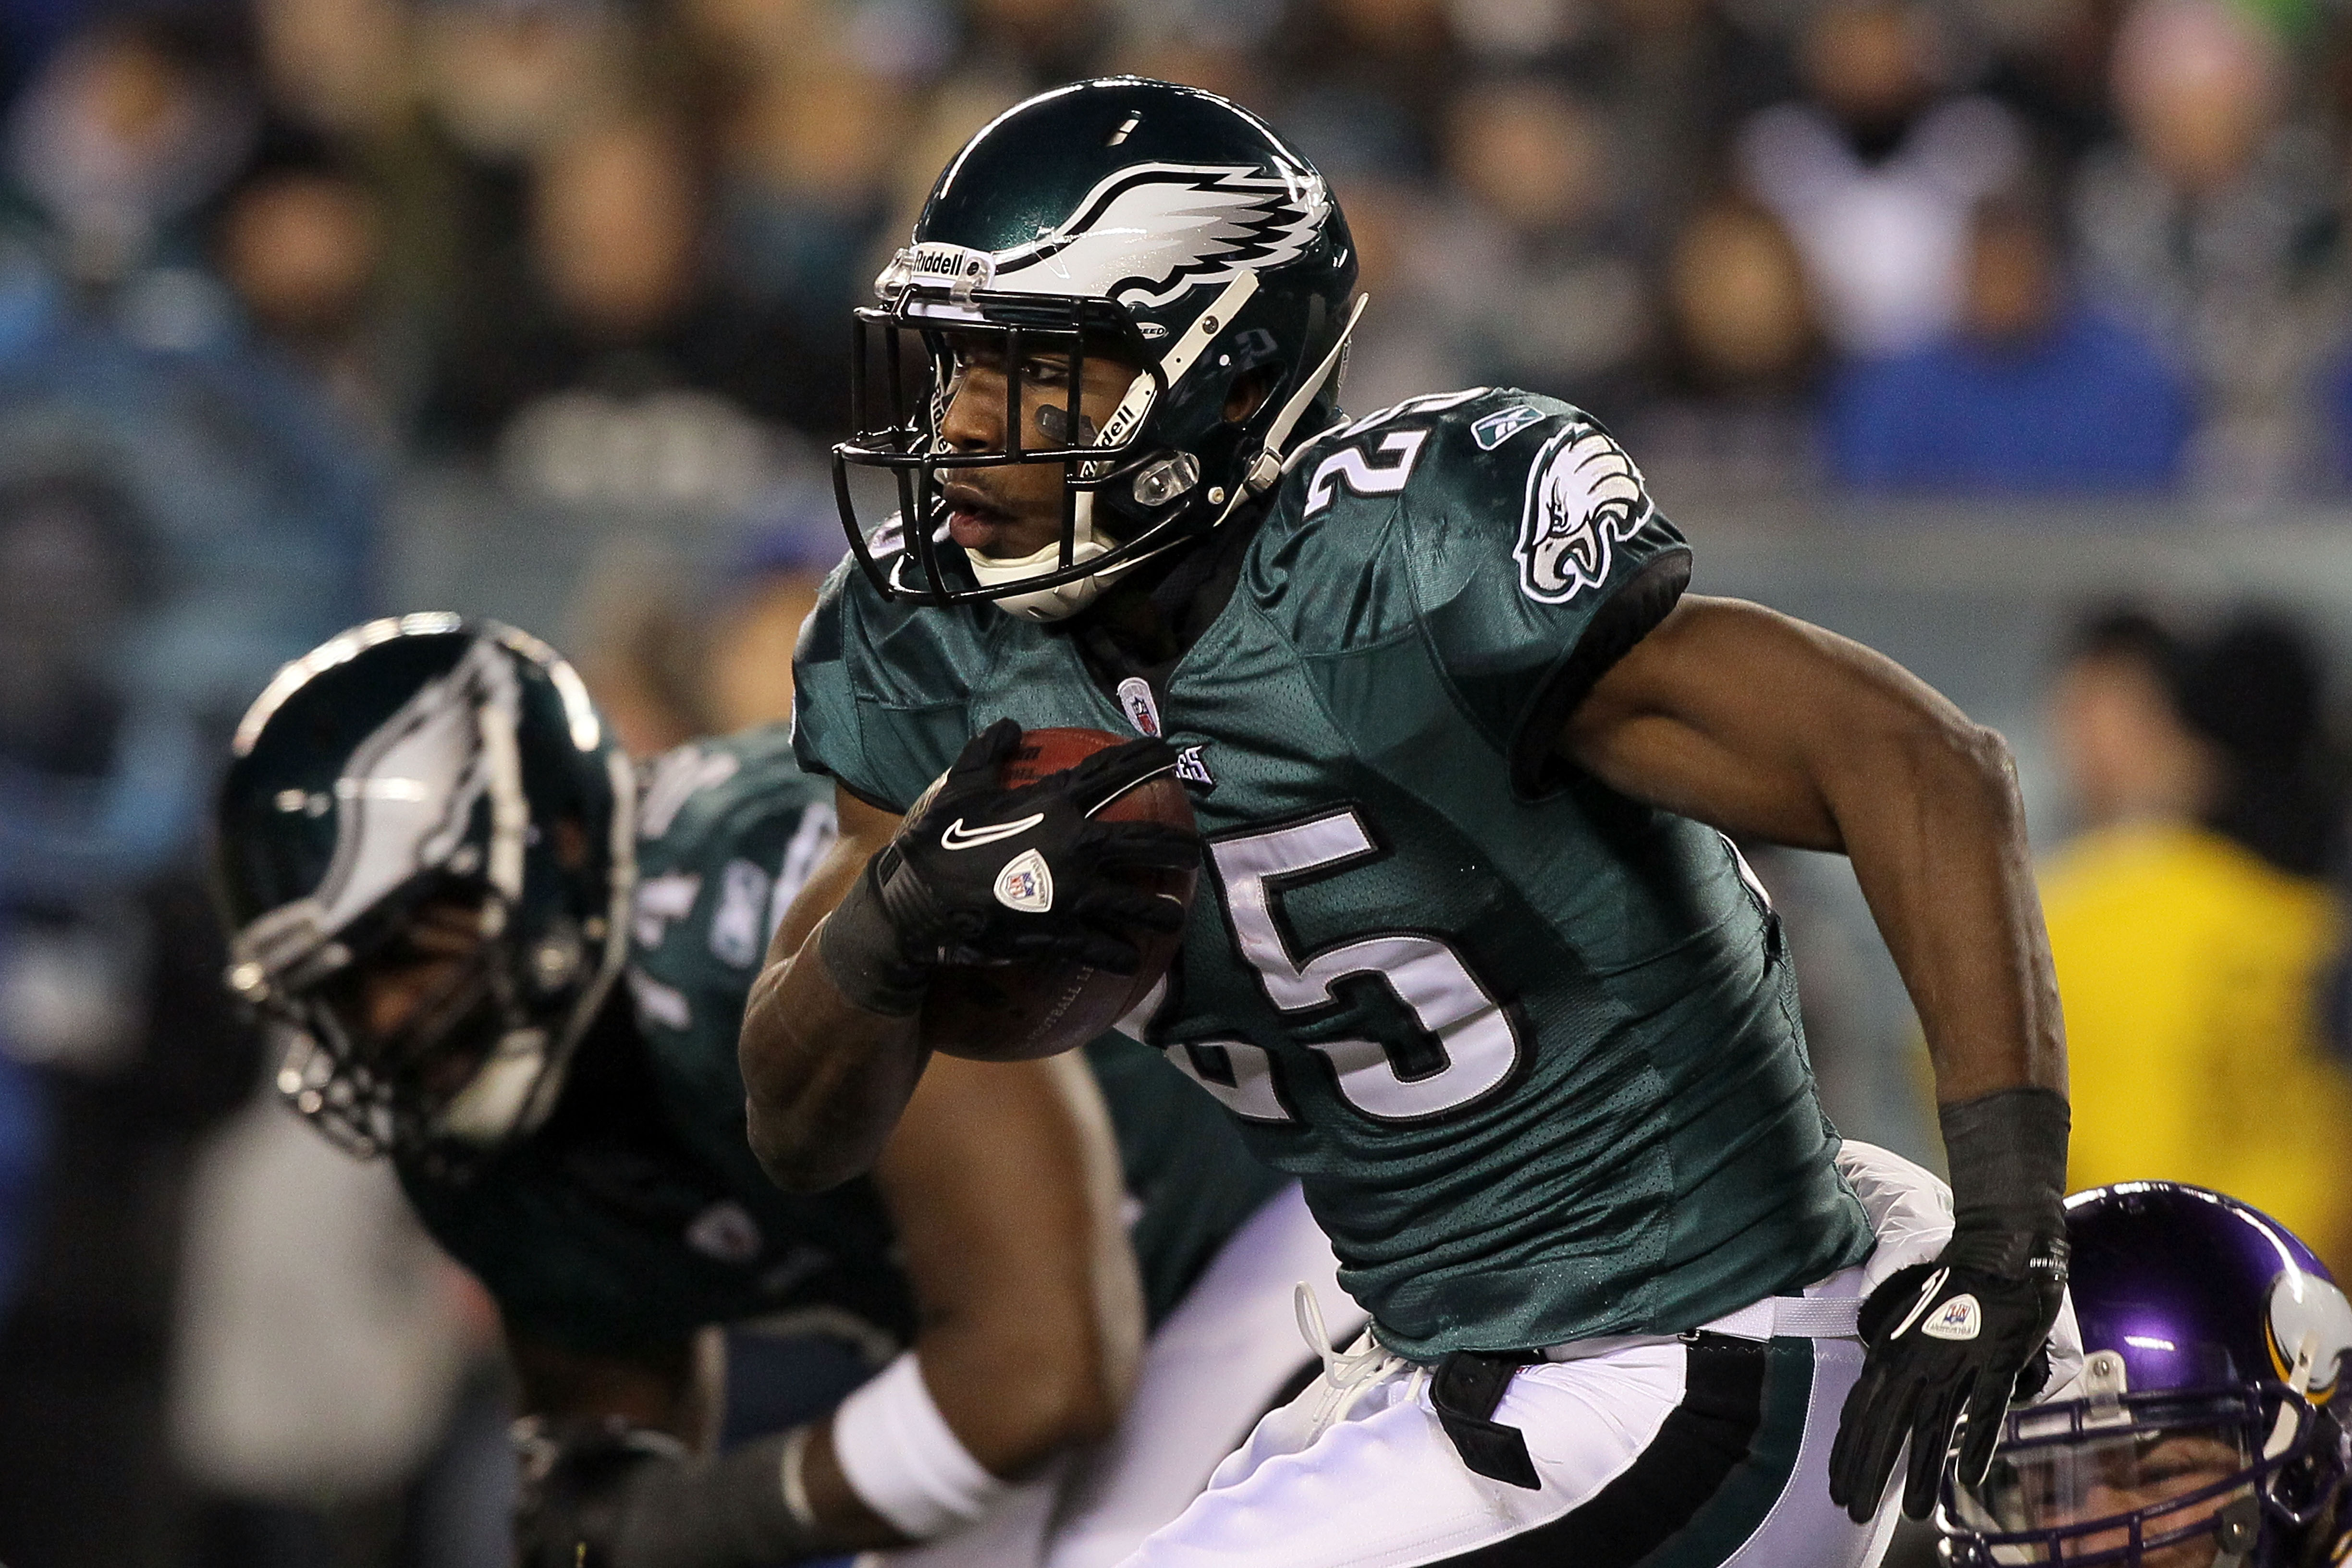 PHILADELPHIA, PA - DECEMBER 28:  LeSean McCoy #25 of the Philadelphia Eagles in action against the Minnesota Vikings at Lincoln Financial Field on December 28, 2010 in Philadelphia, Pennsylvania.  (Photo by Jim McIsaac/Getty Images)